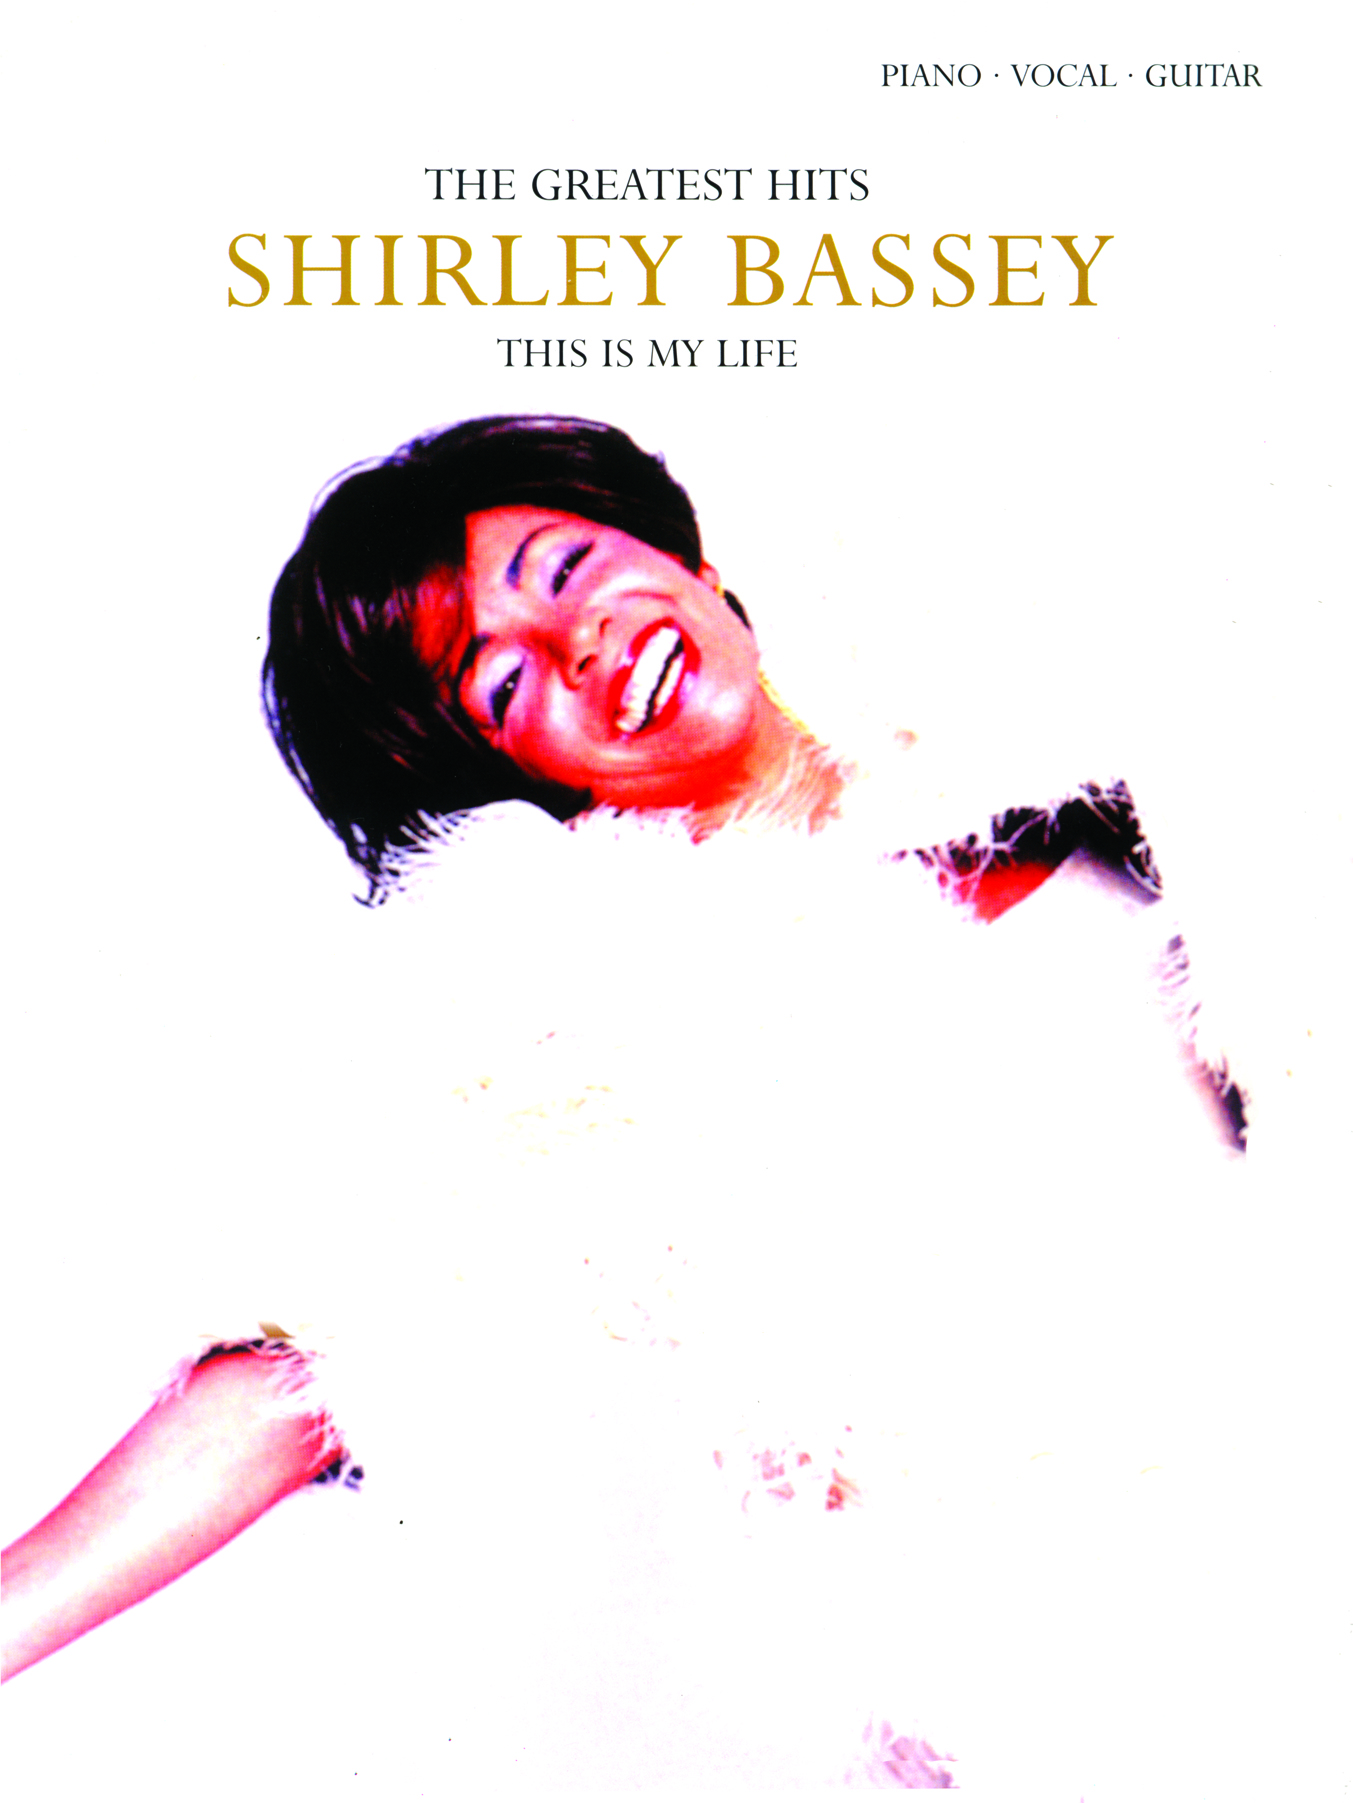 Shirley Bassey: This is my life: Piano  Vocal  Guitar: Artist Songbook